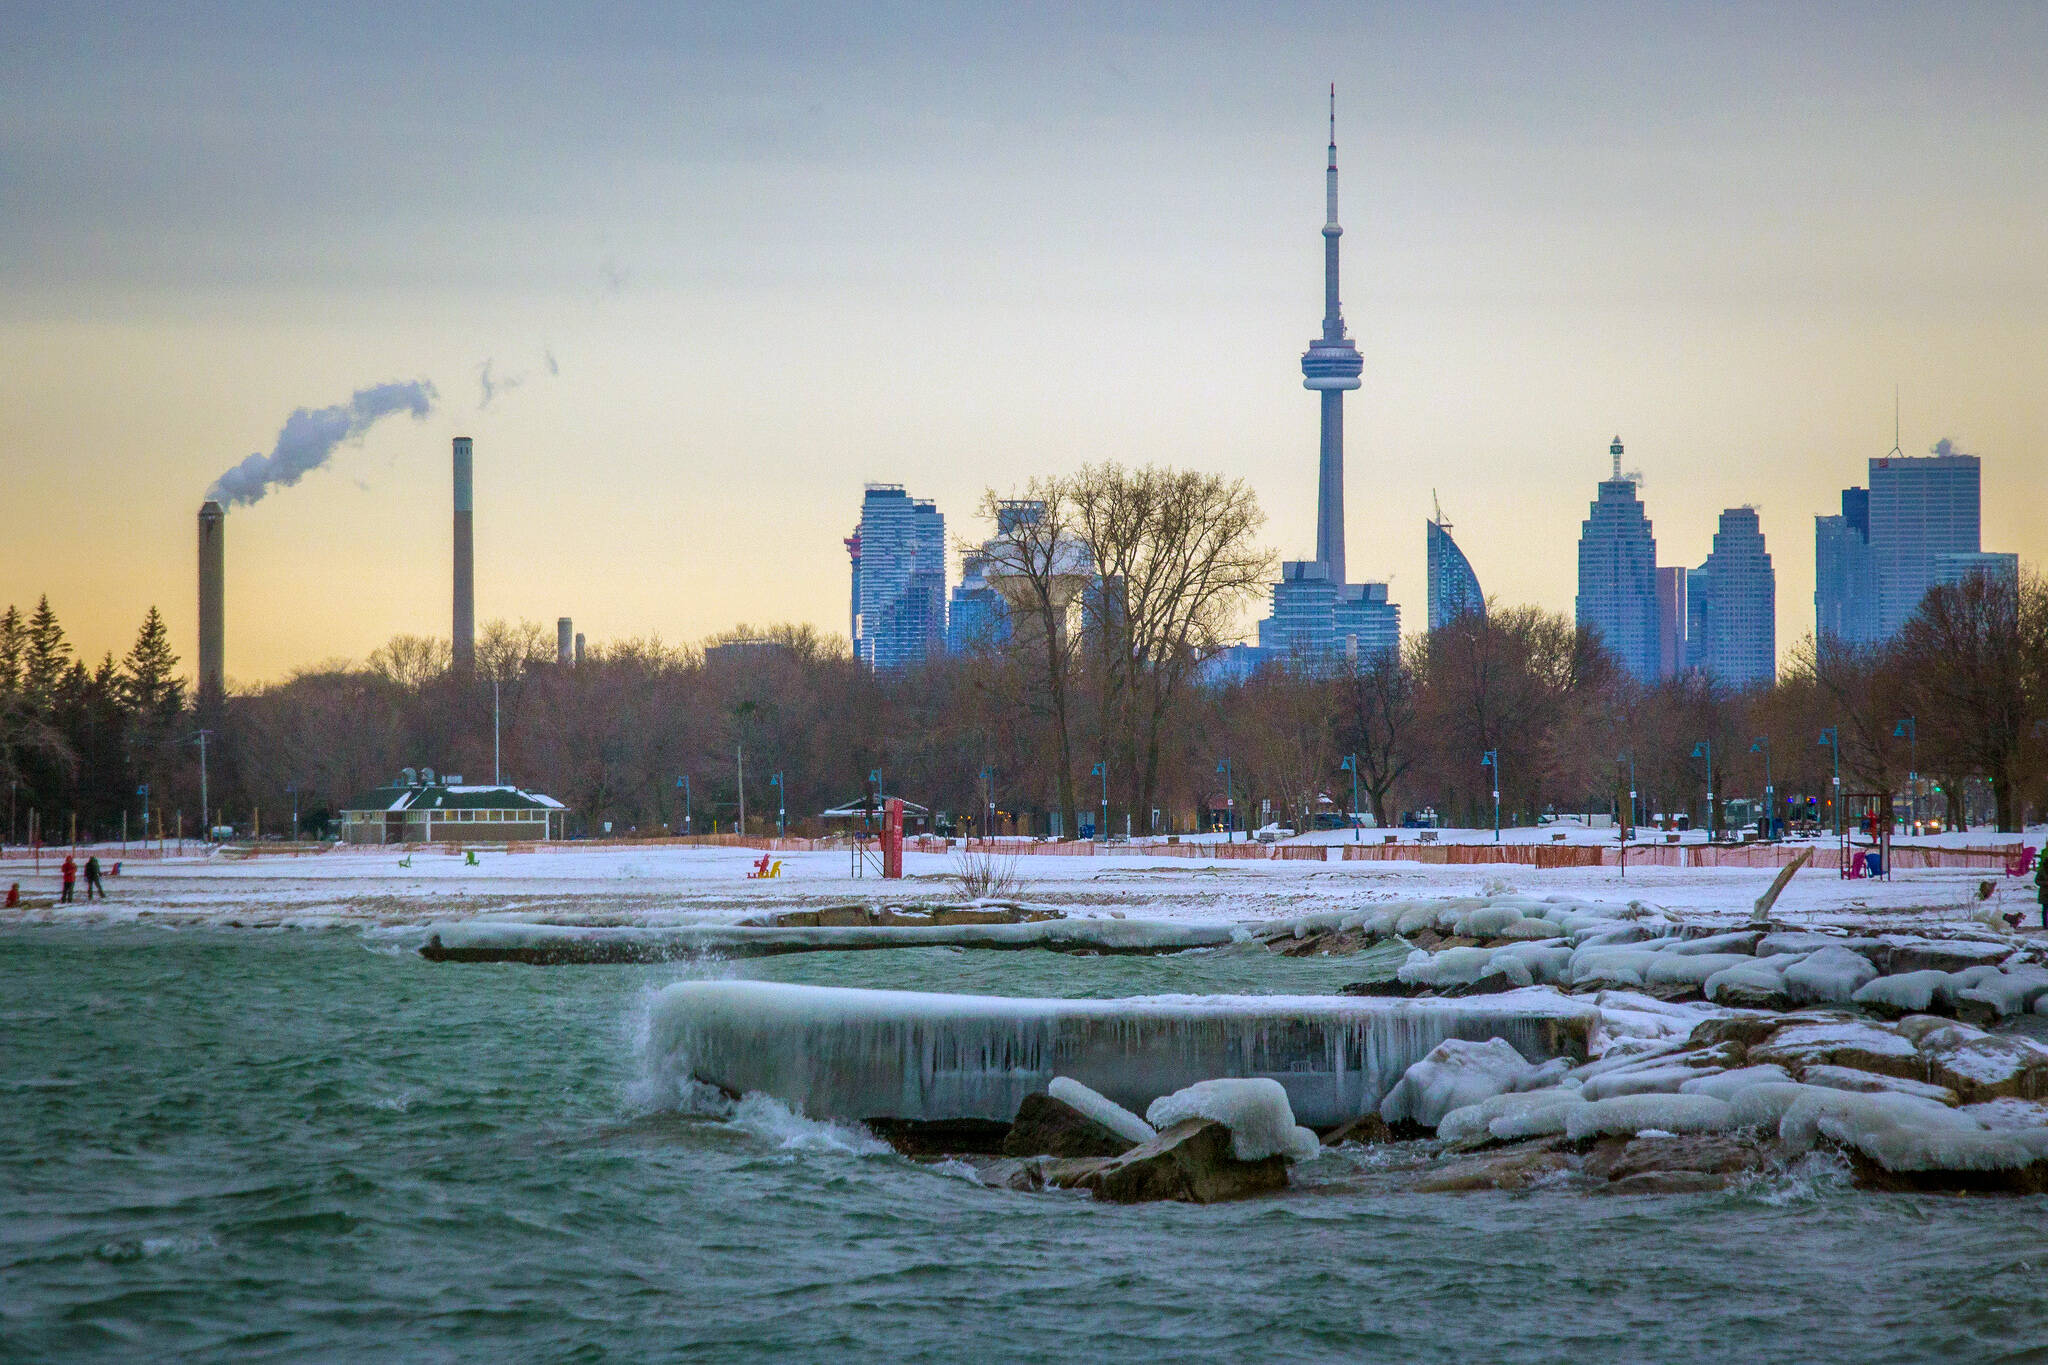 February expected to be brutal for winter weather in Toronto